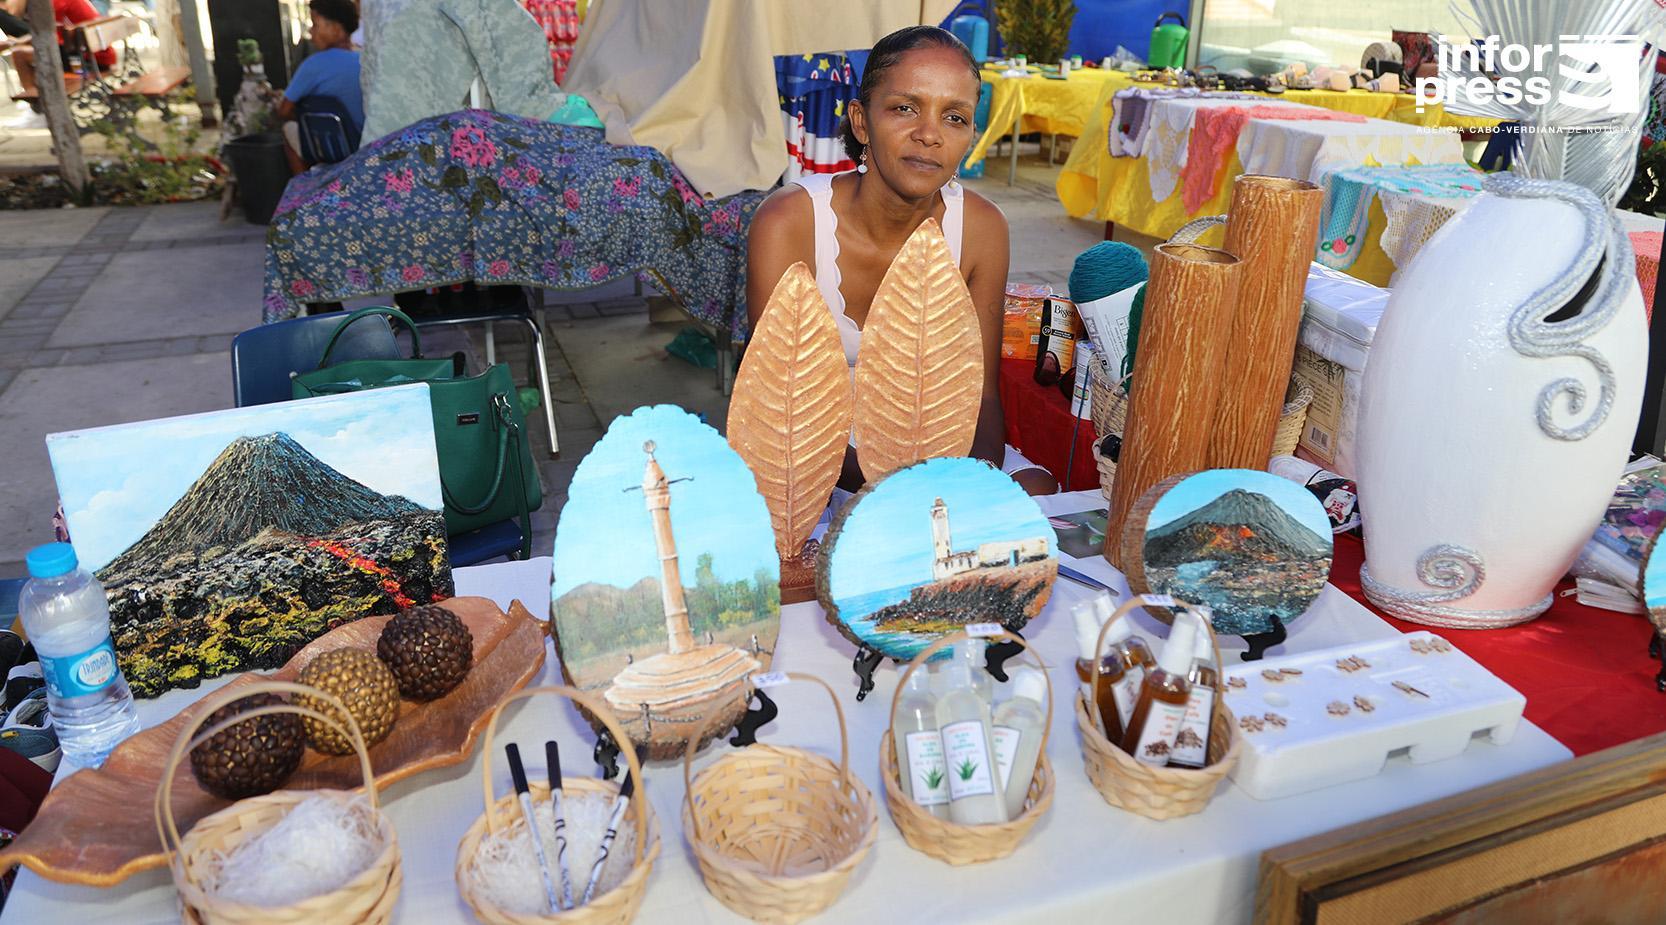 Artisan says she has to travel to other countries to acquire materials ...